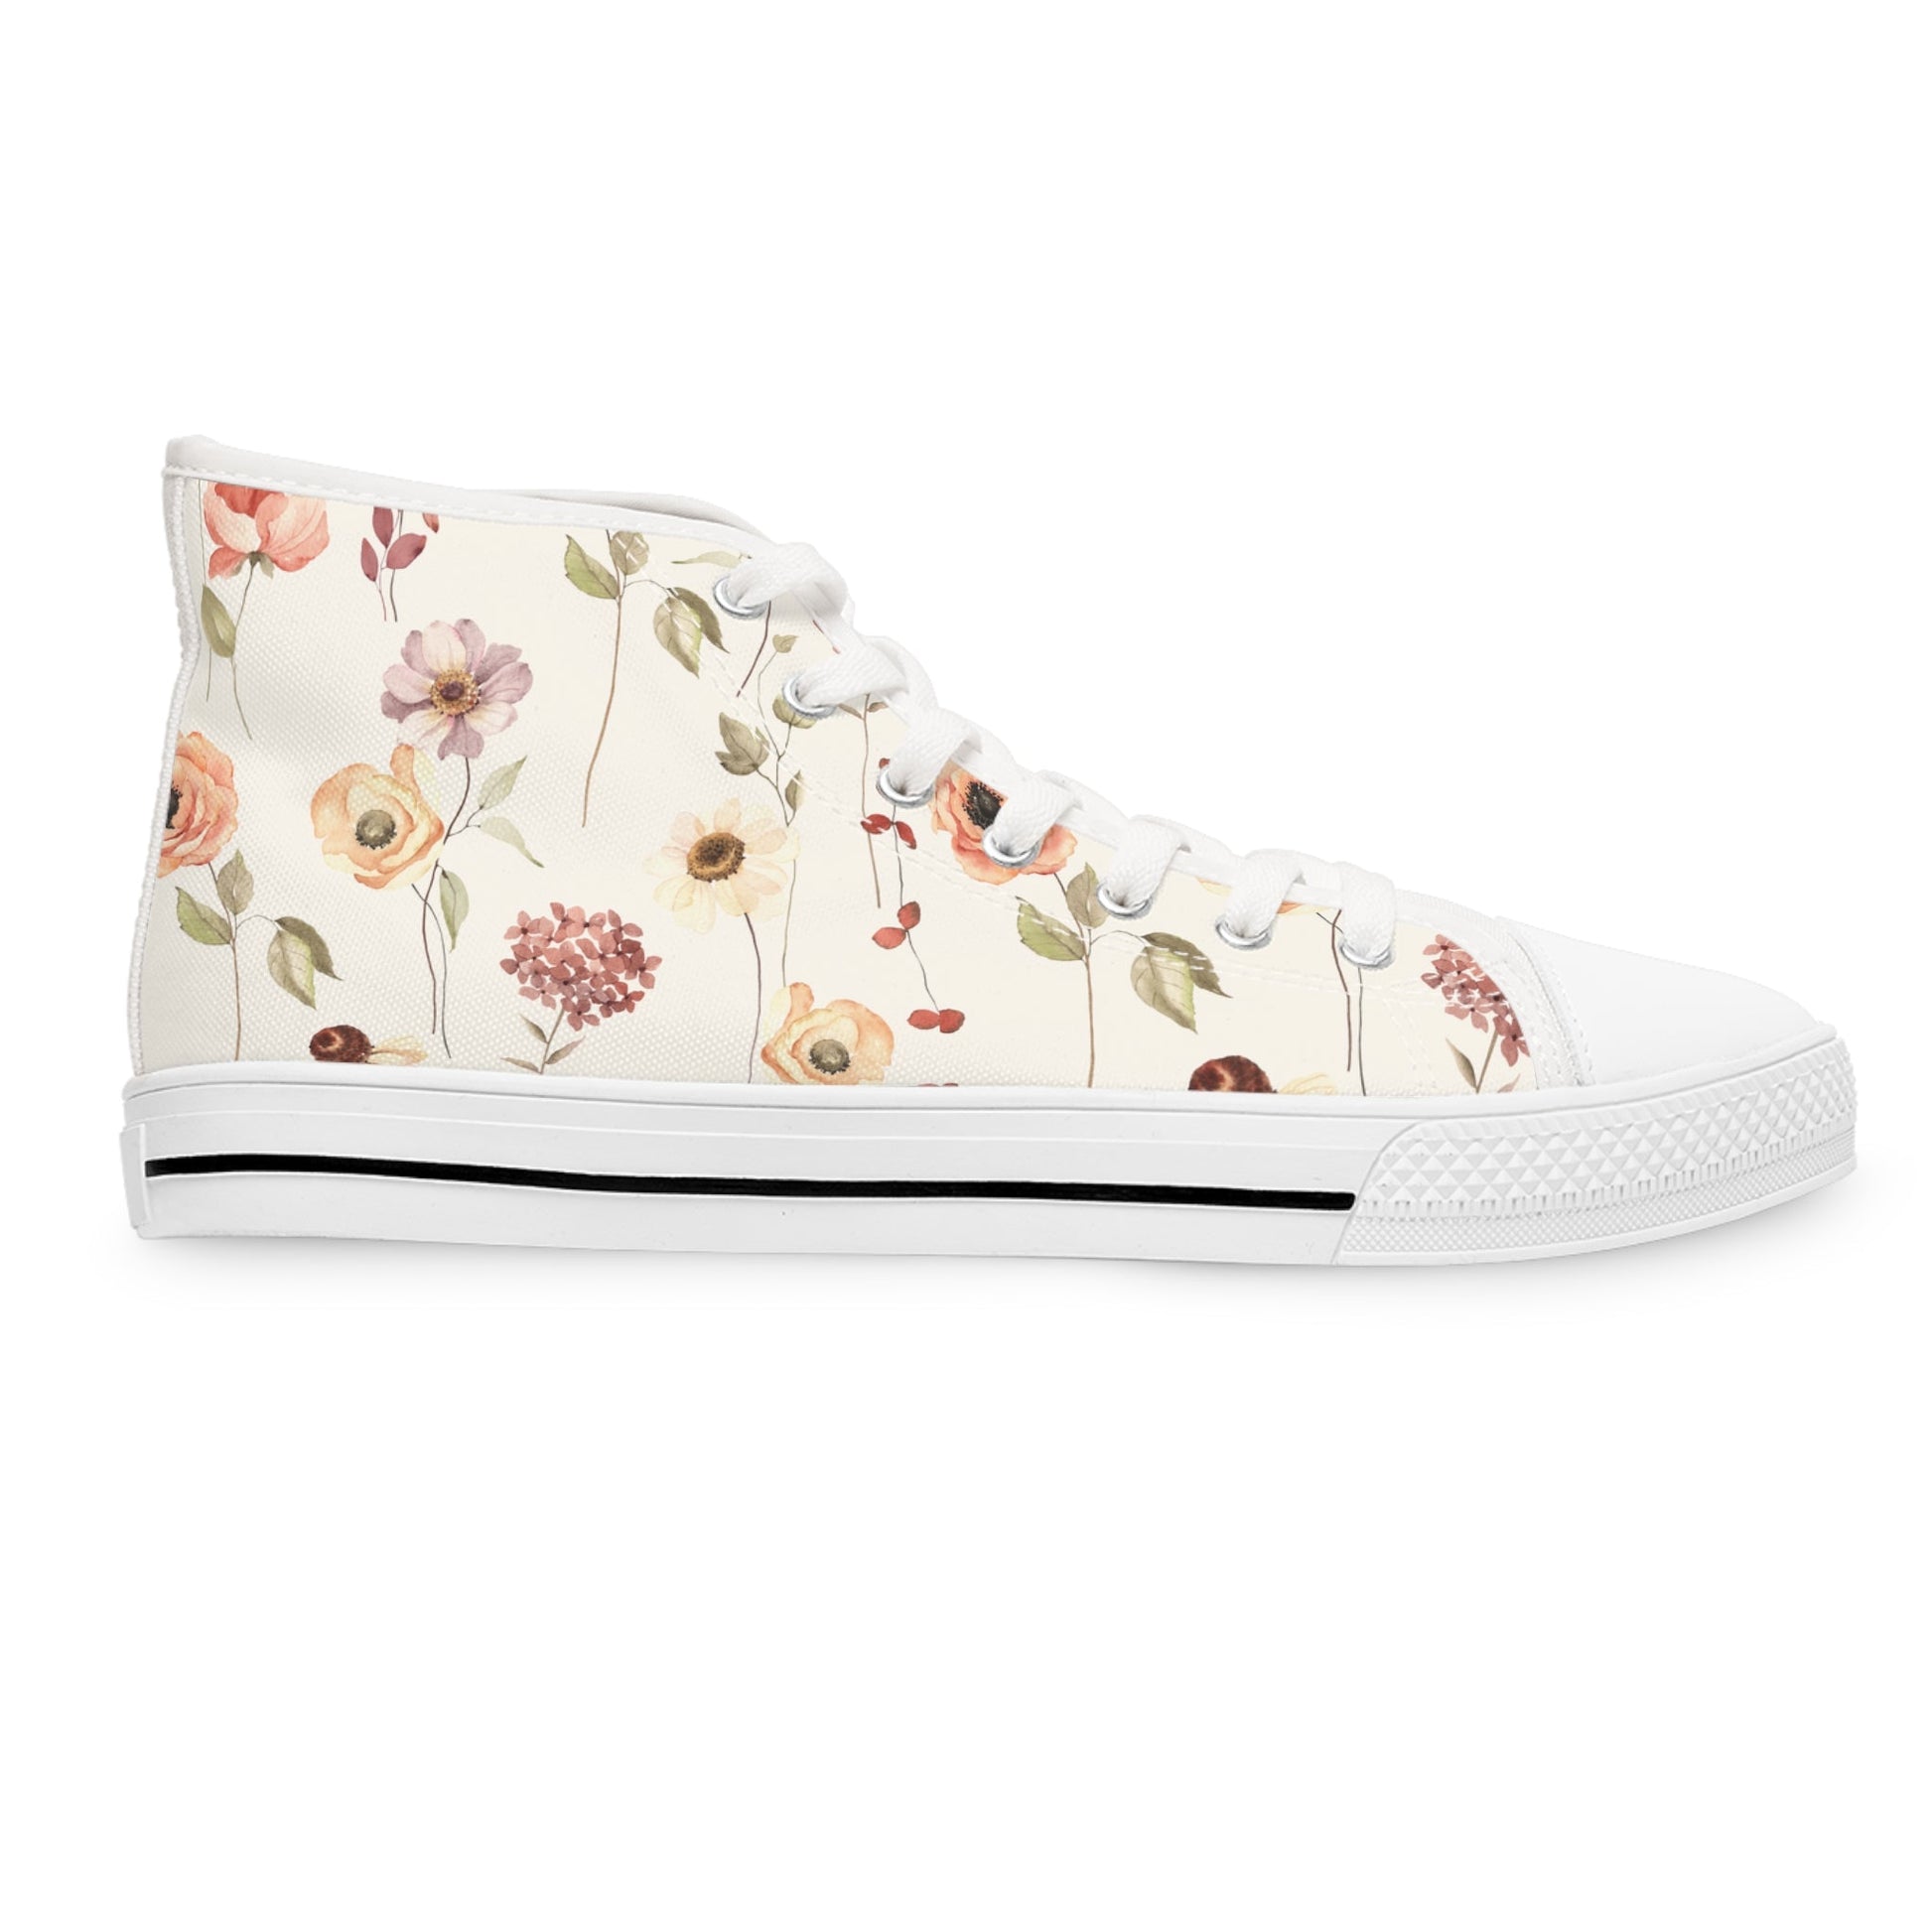 Shoes - Women's Summer High Top Sneakers